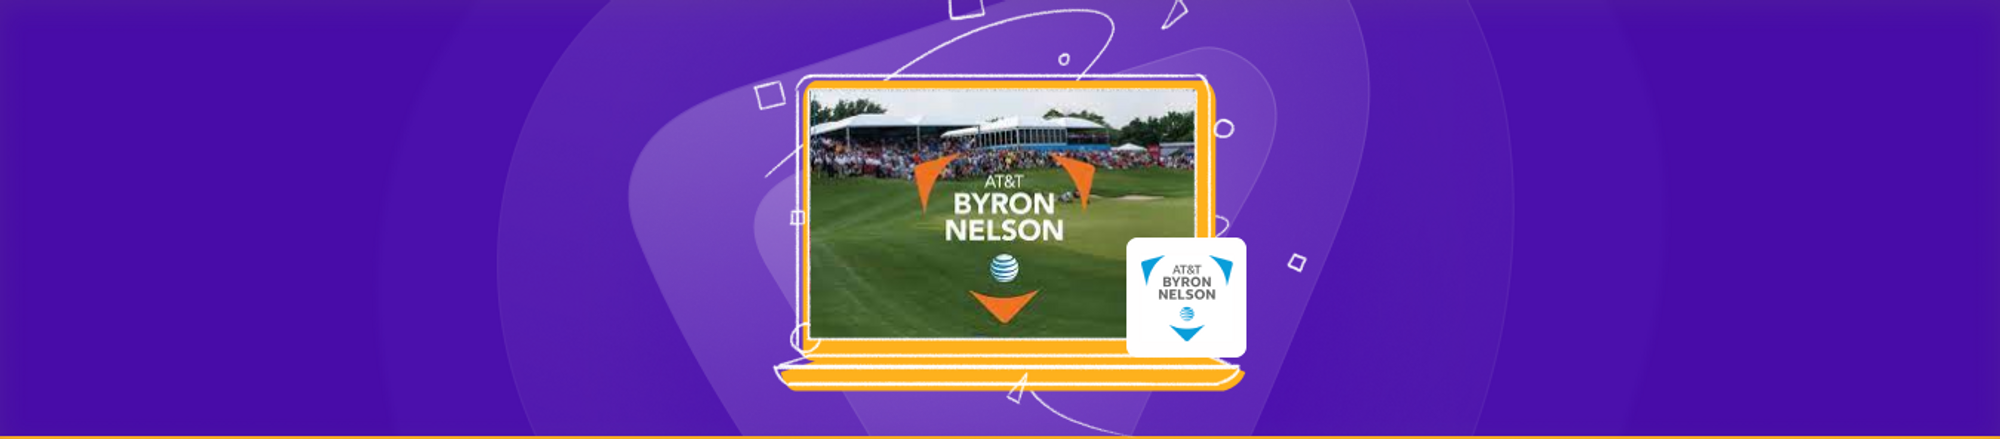 at&t byron nelson watch live